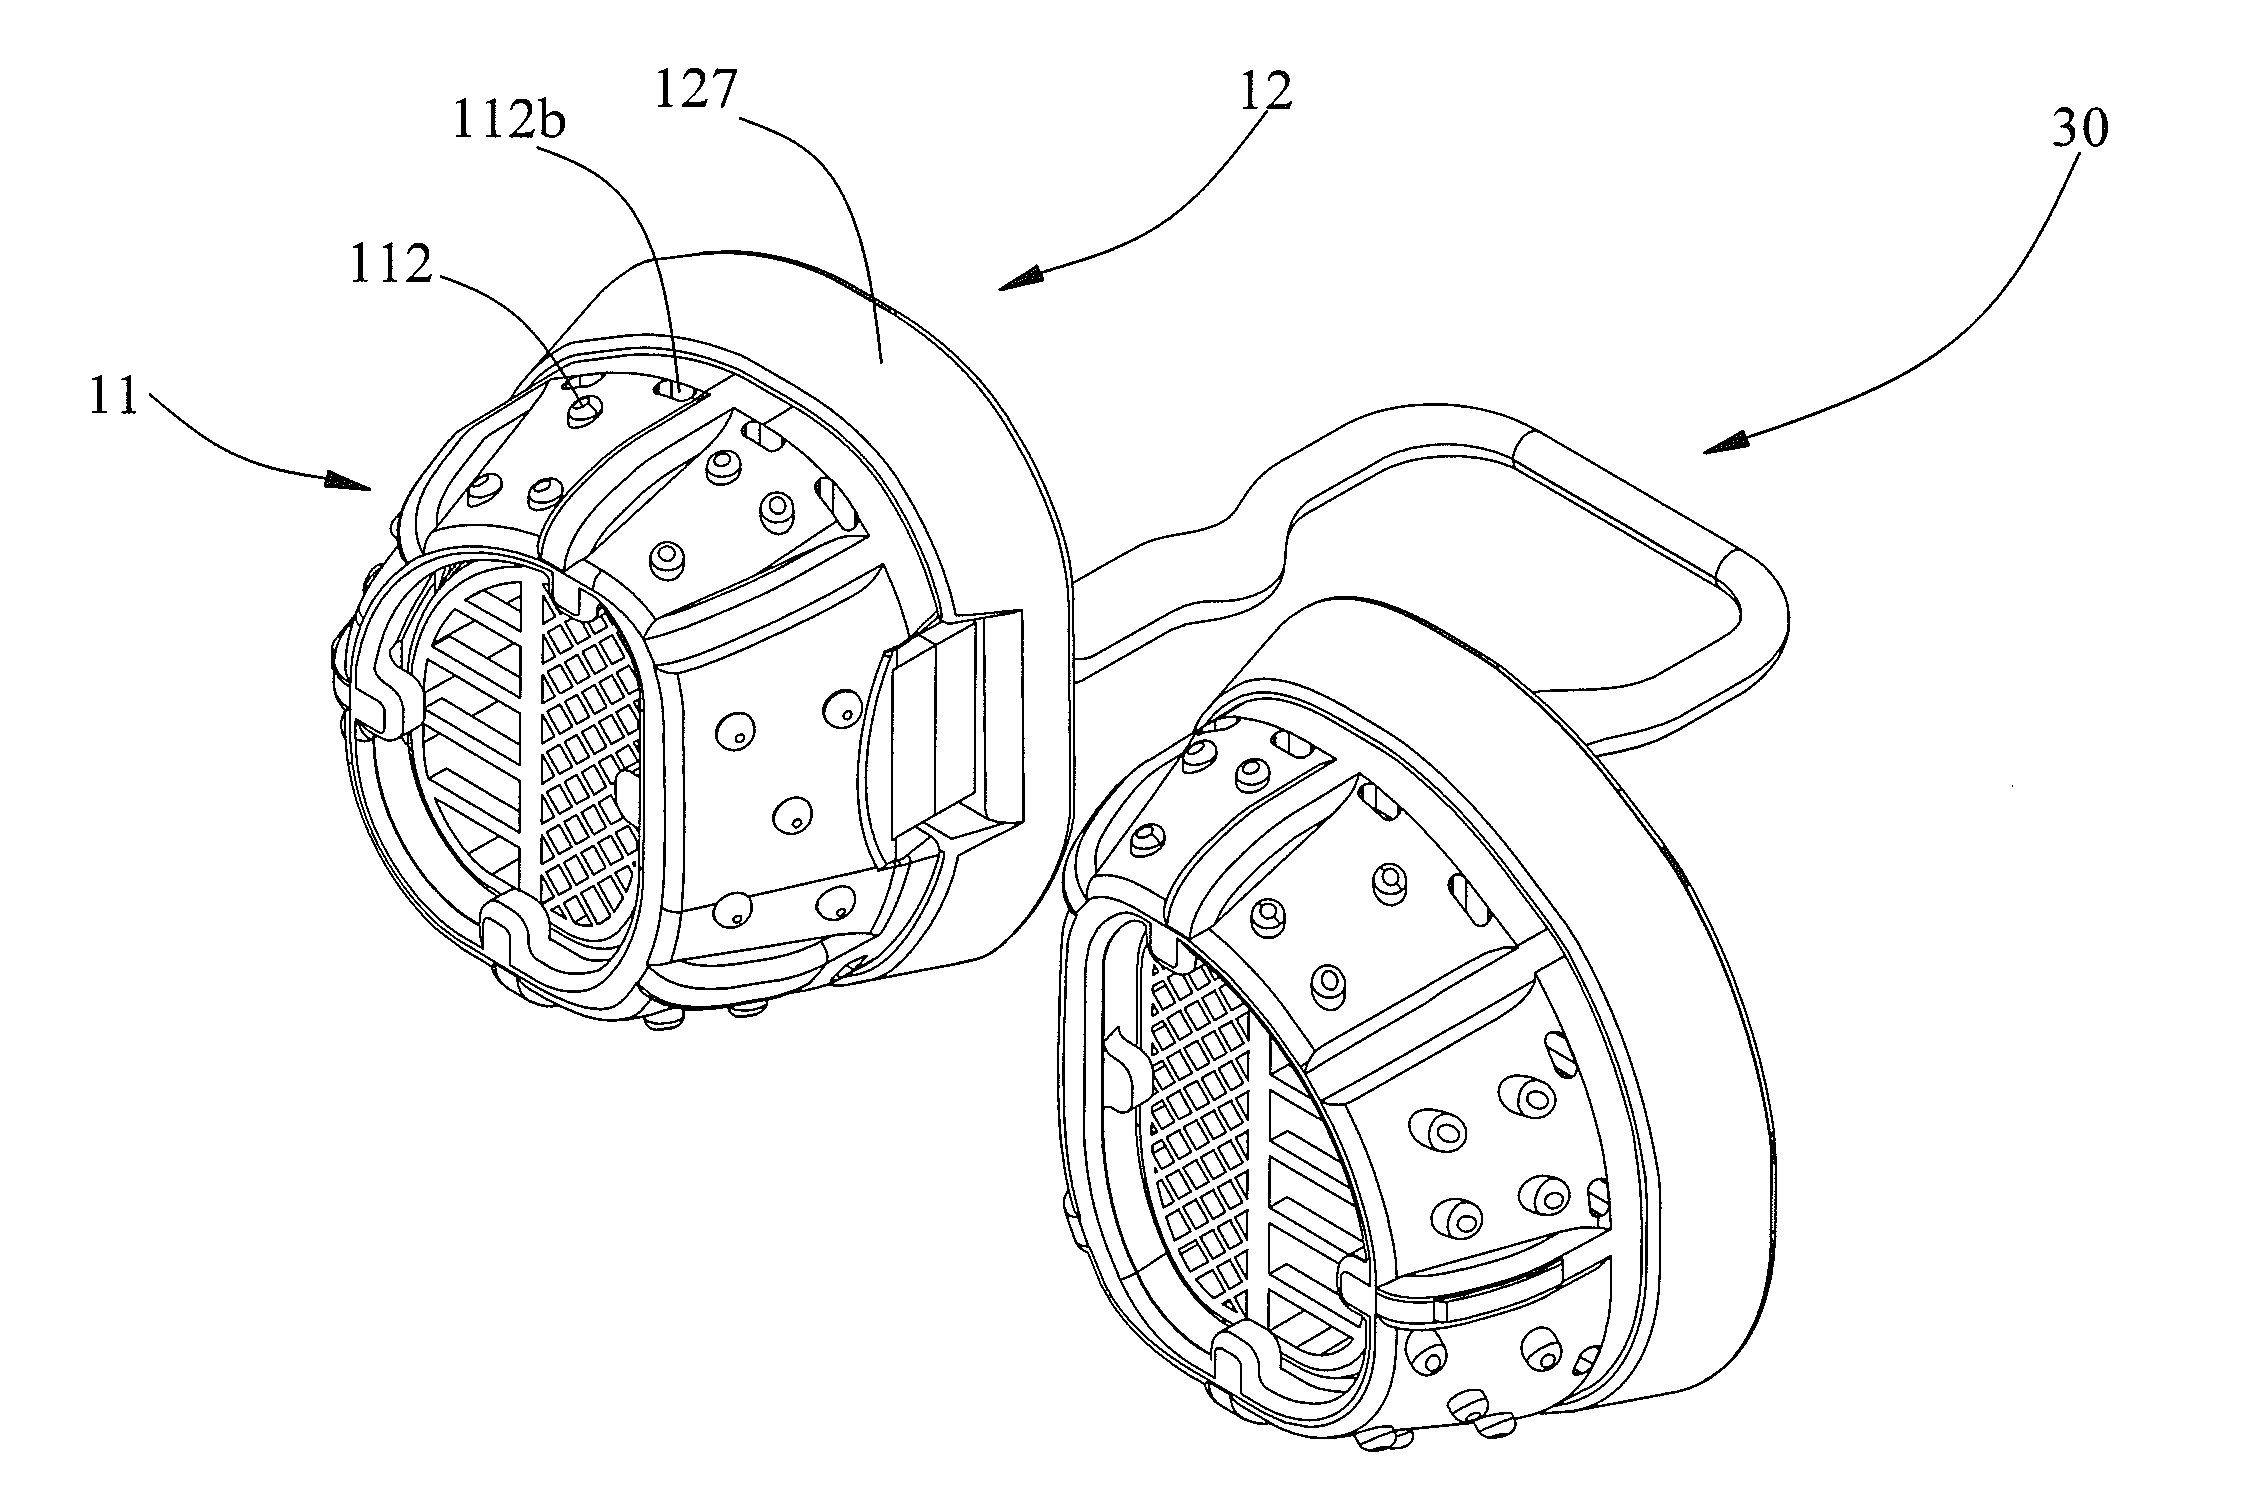 Air-Filtering Device